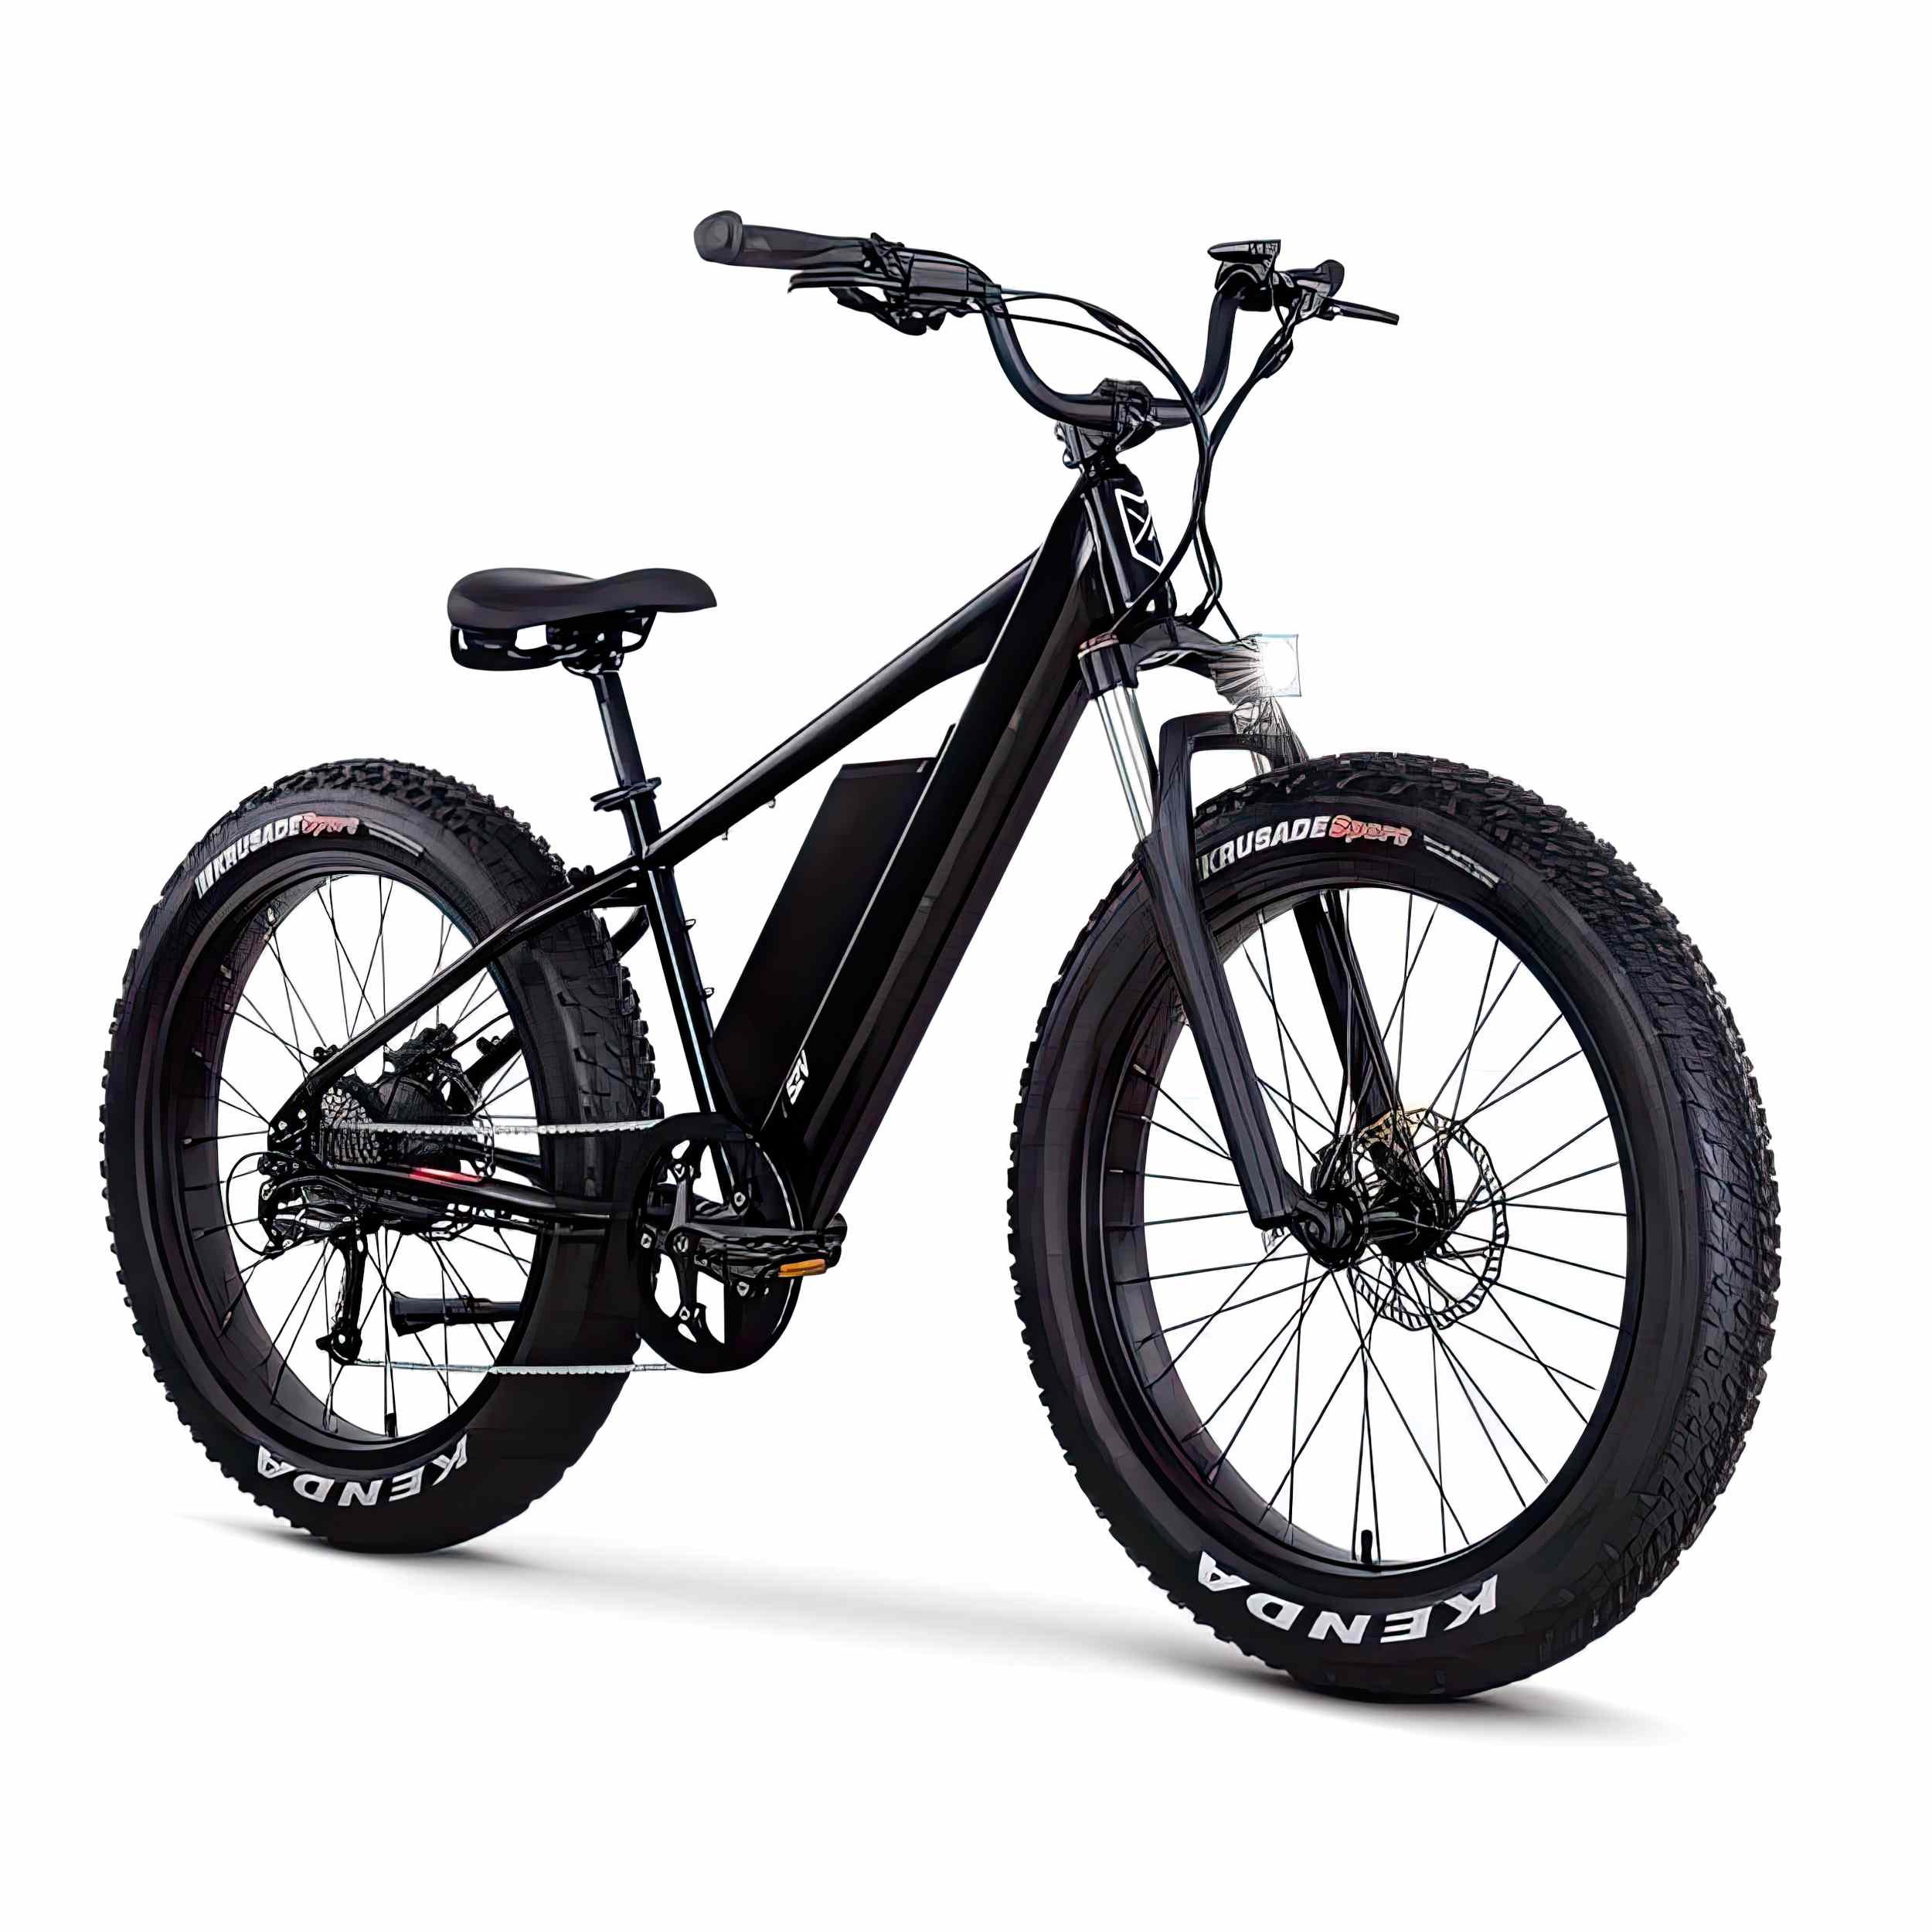  RipCurrent is the ultimate fat-tired E-Bike for those wanting to nimbly navigate tricky terrain in absolute comfort. 